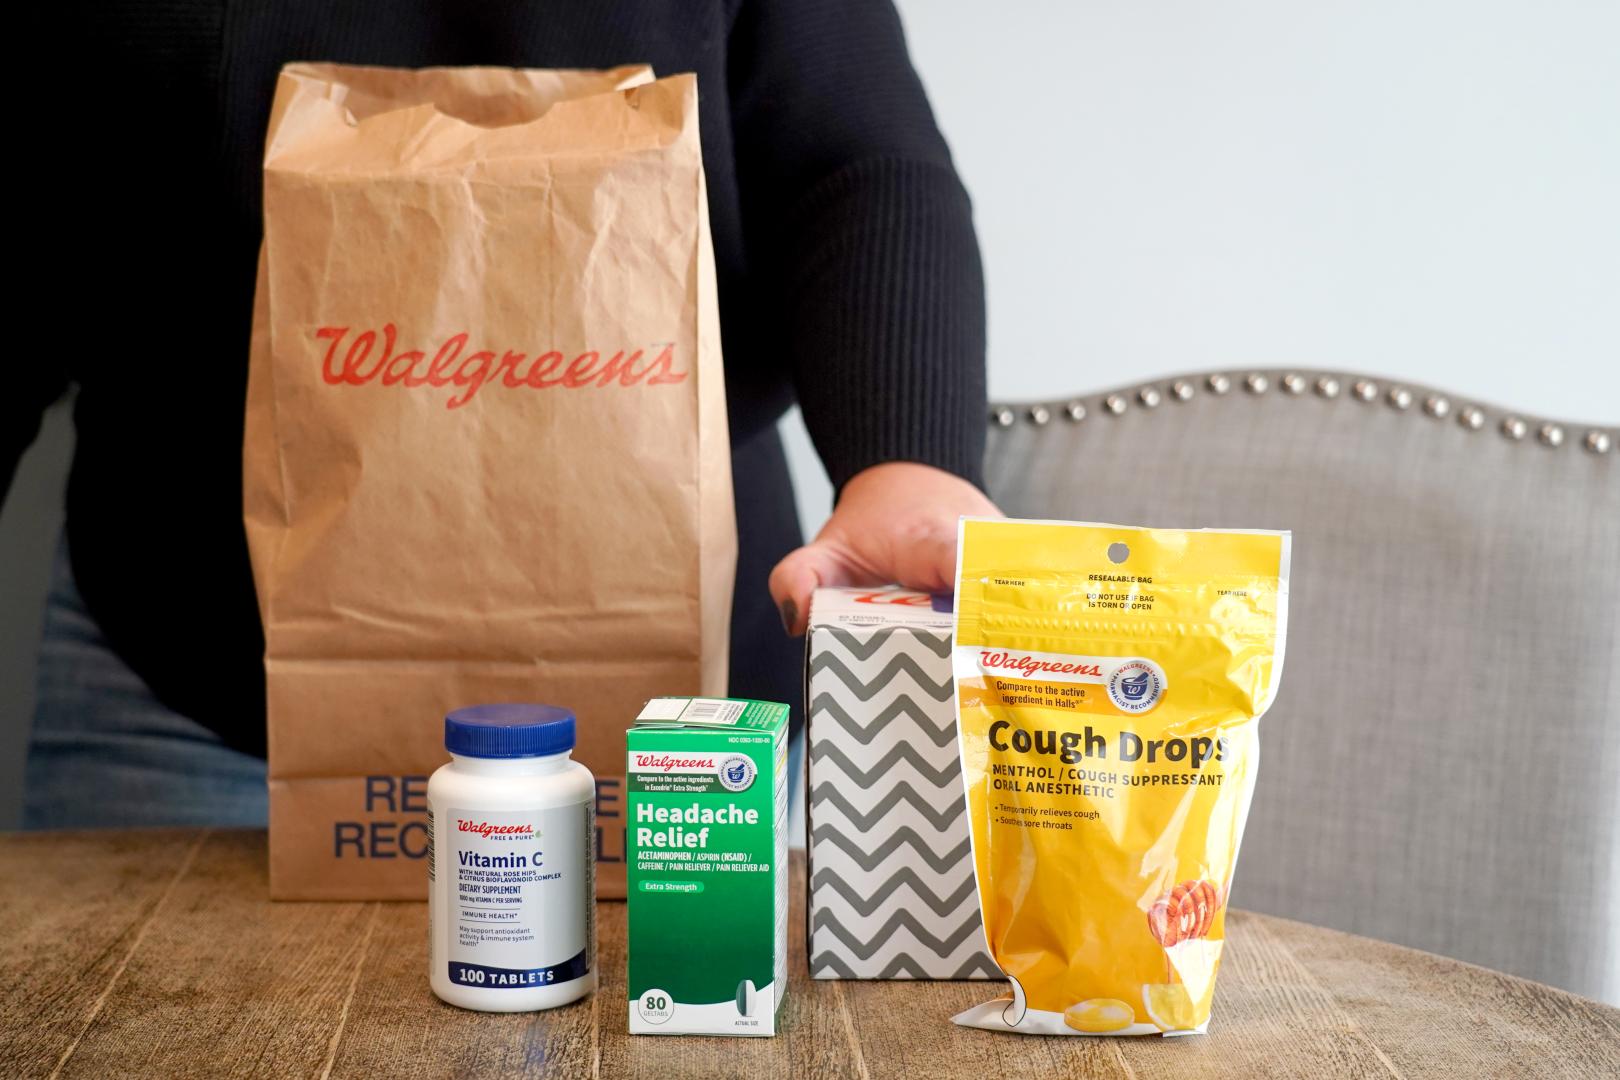 Walgreens offers the most retail products for 24-Hour Same Day Delivery, with more than 27,000 items available.